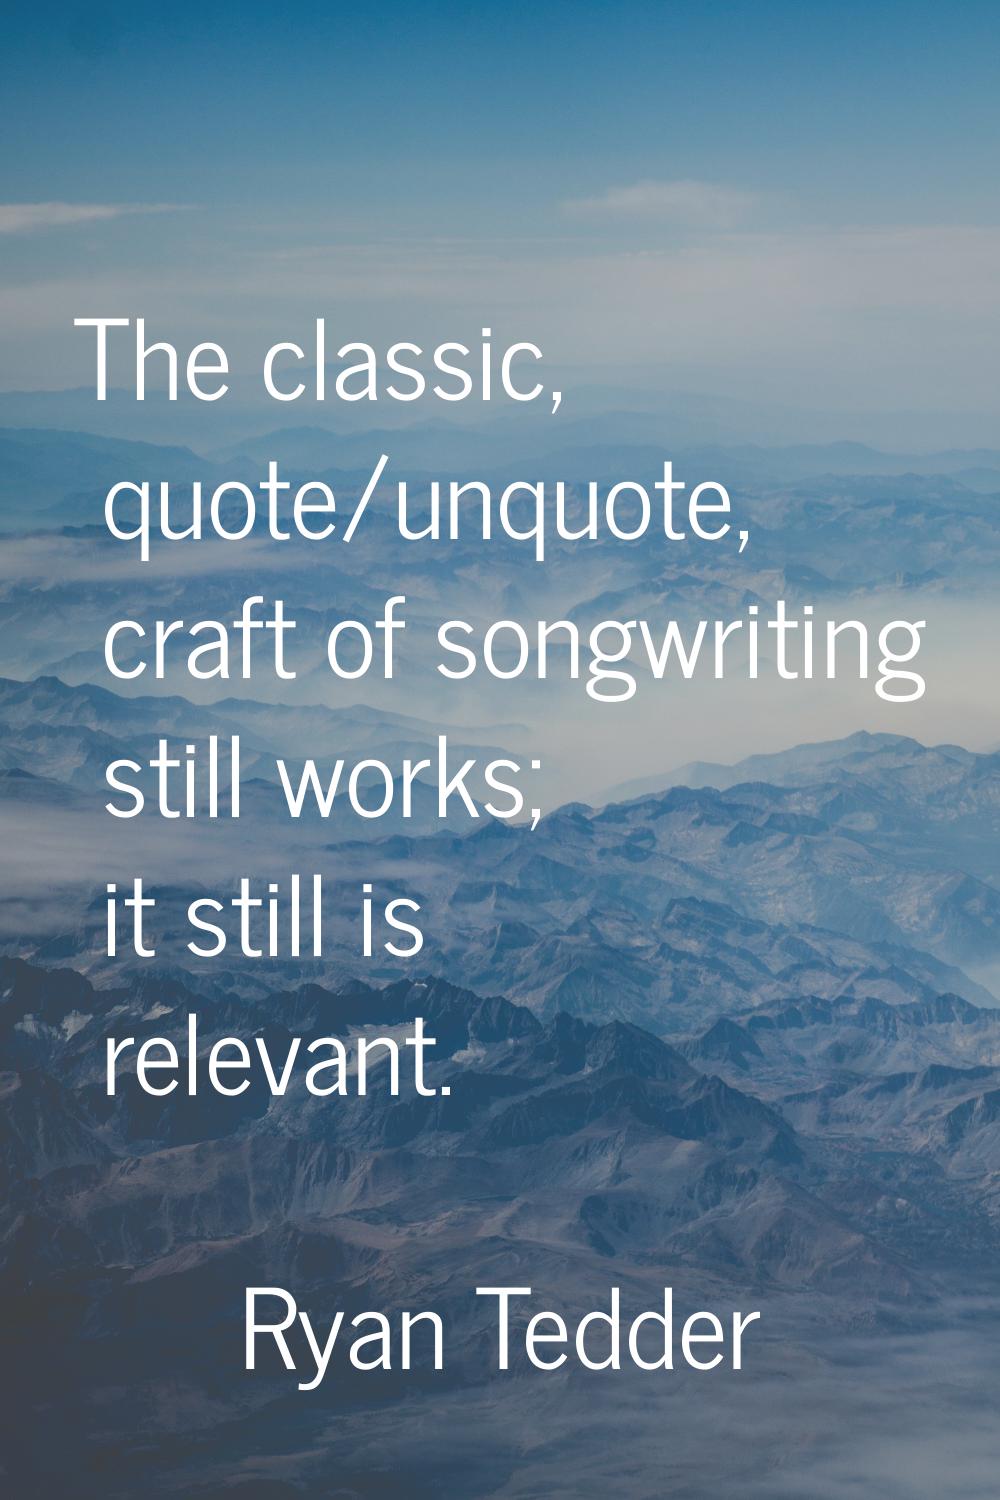 The classic, quote/unquote, craft of songwriting still works; it still is relevant.